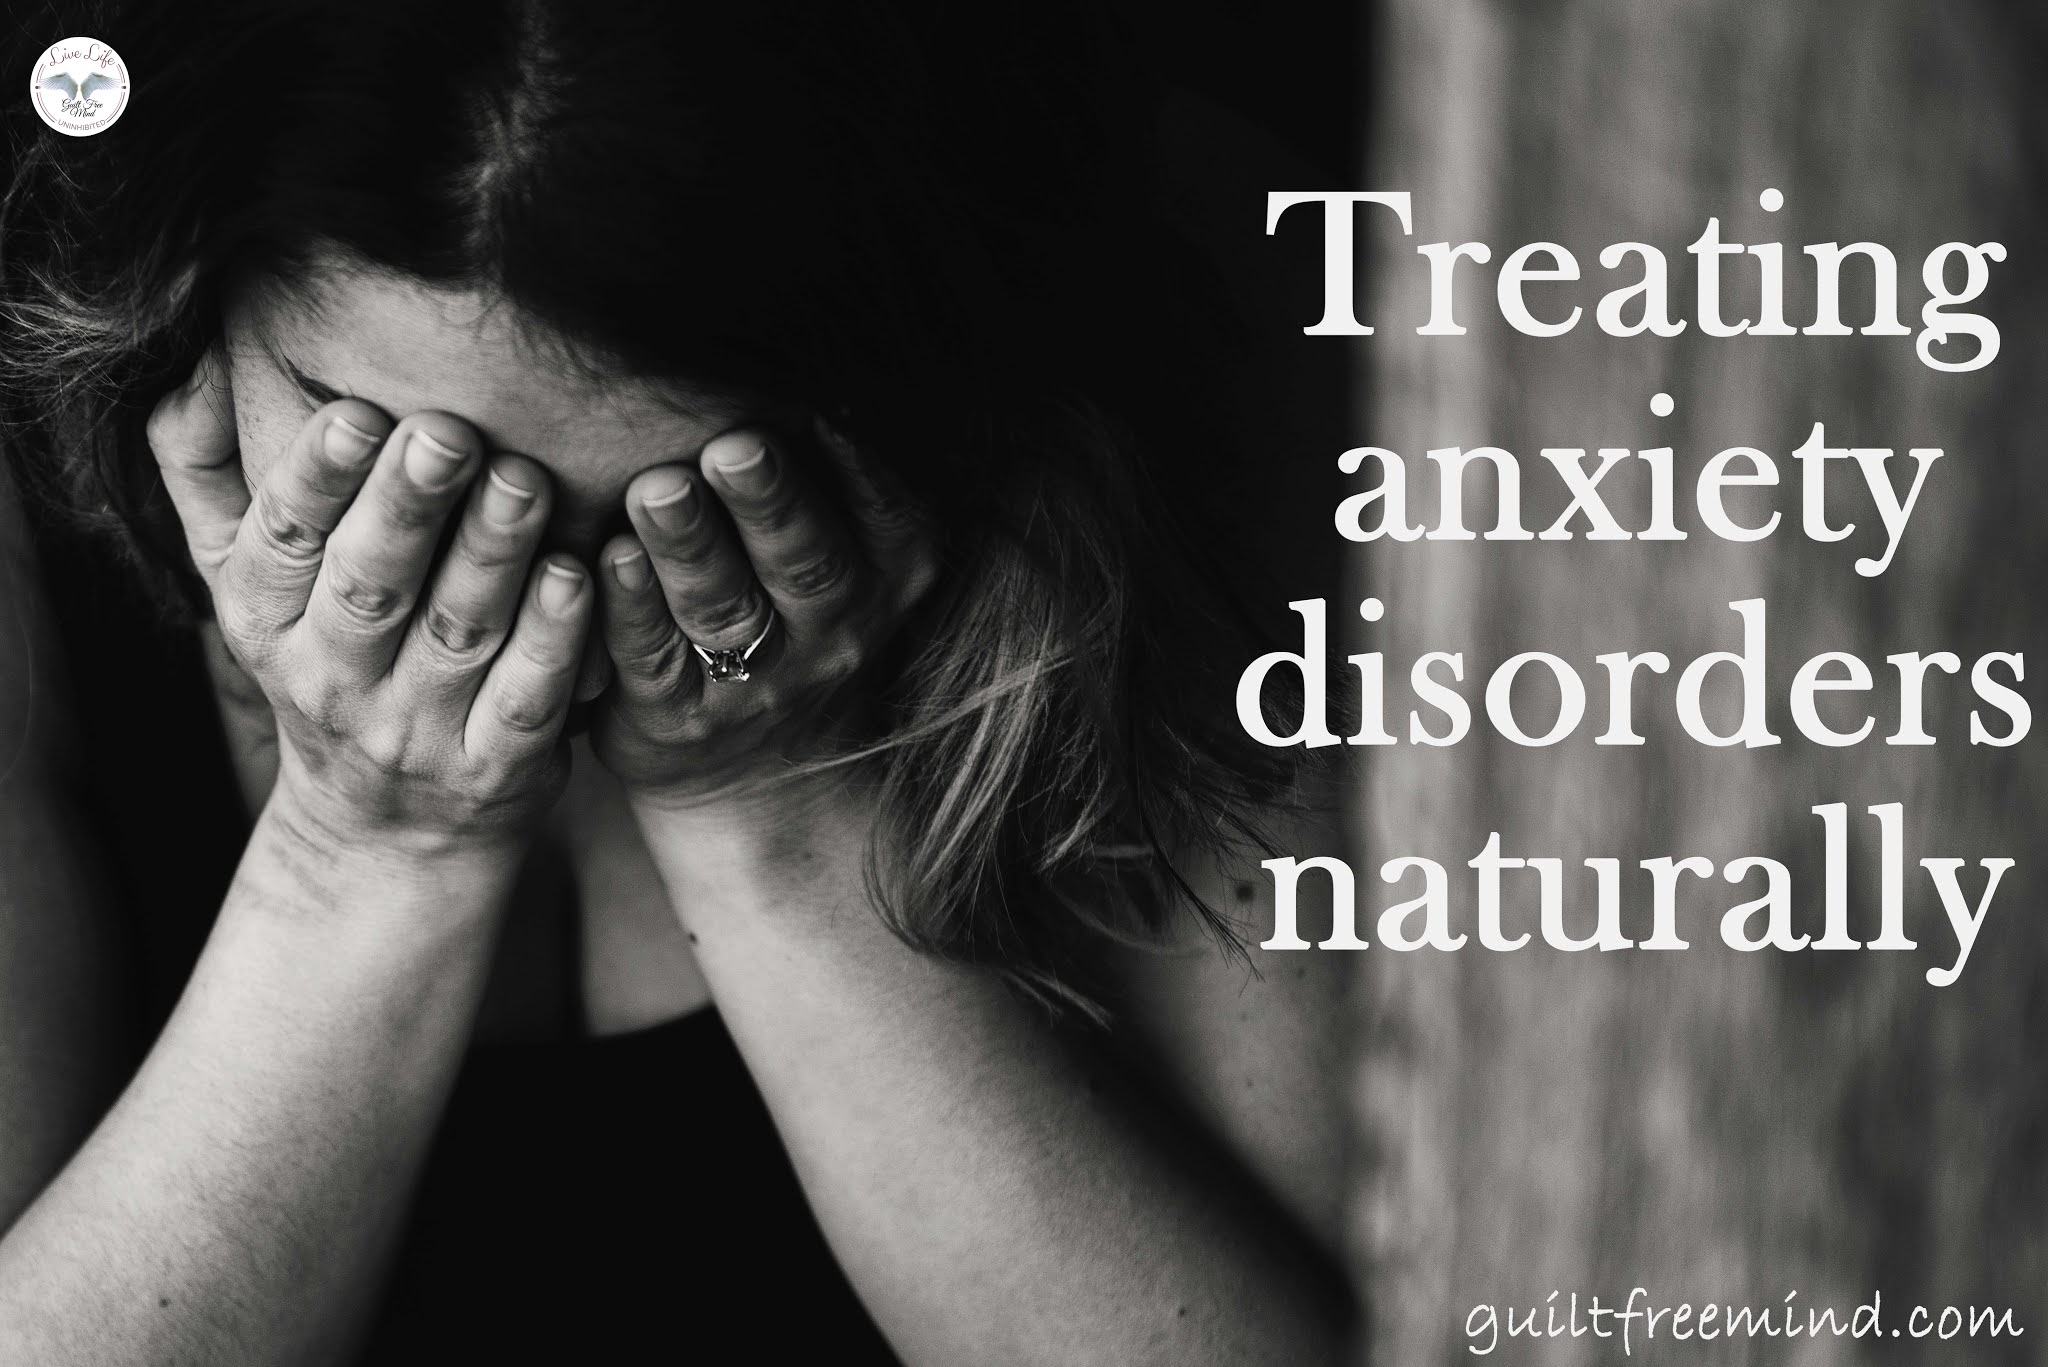 Treating anxiety disorders naturally